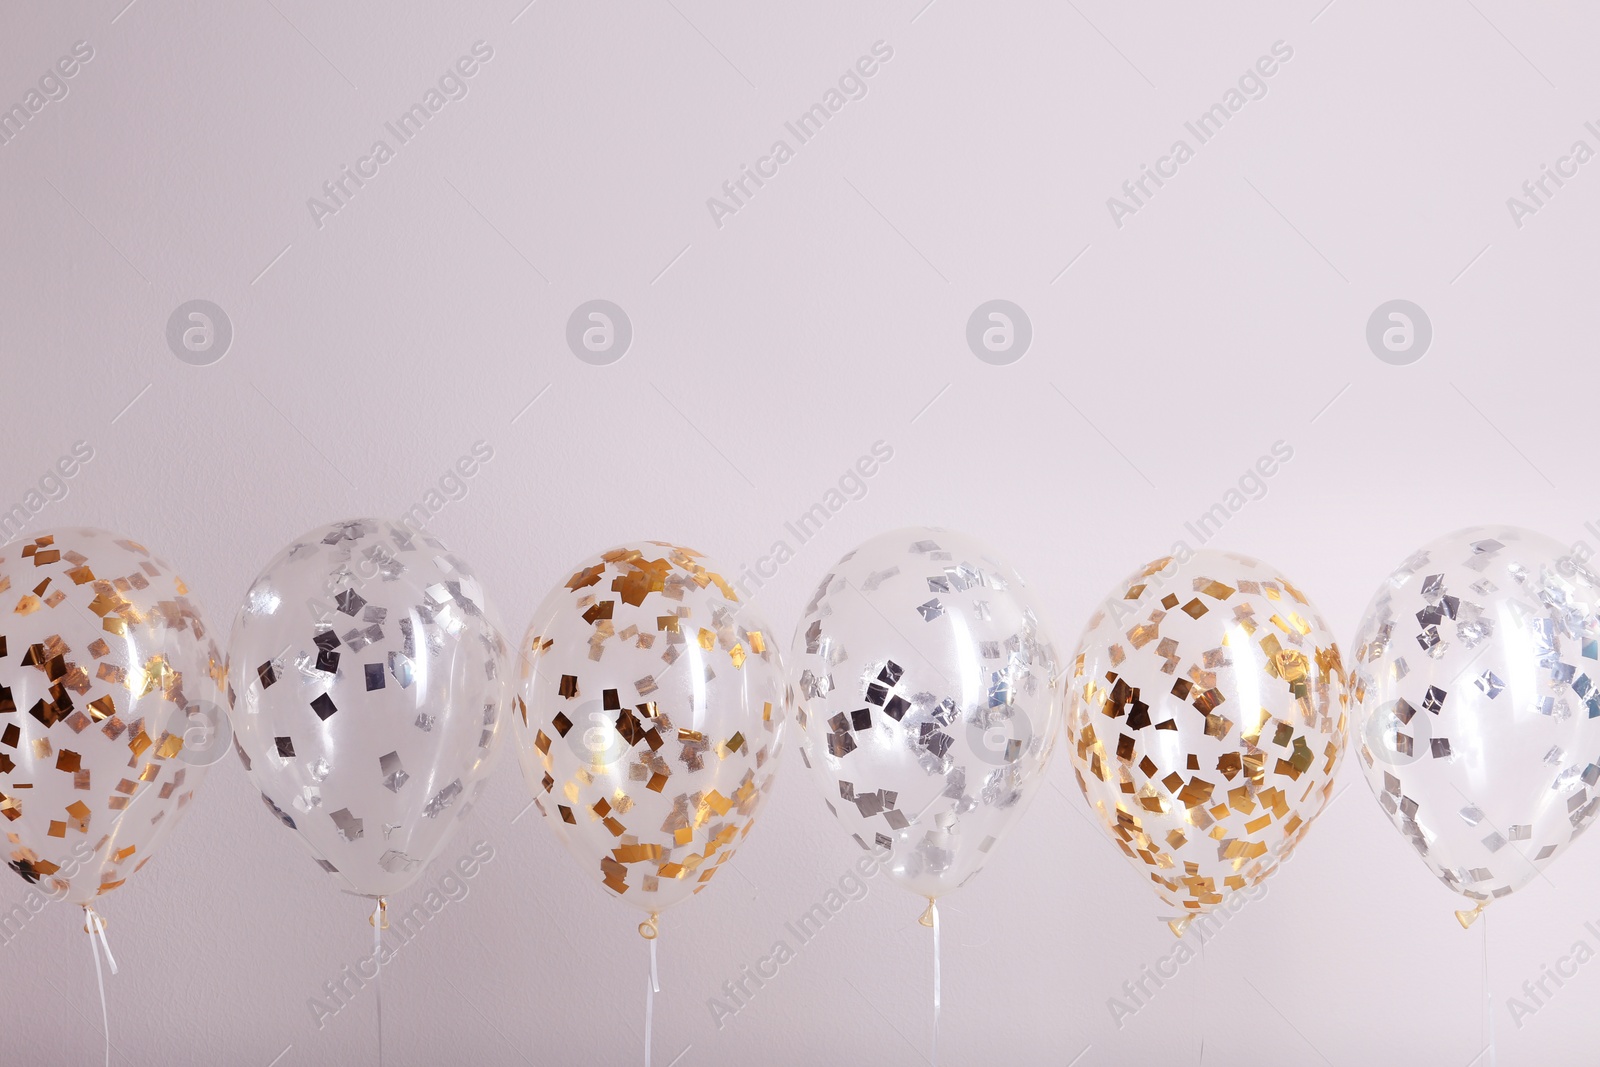 Photo of Color balloons with ribbons on white background